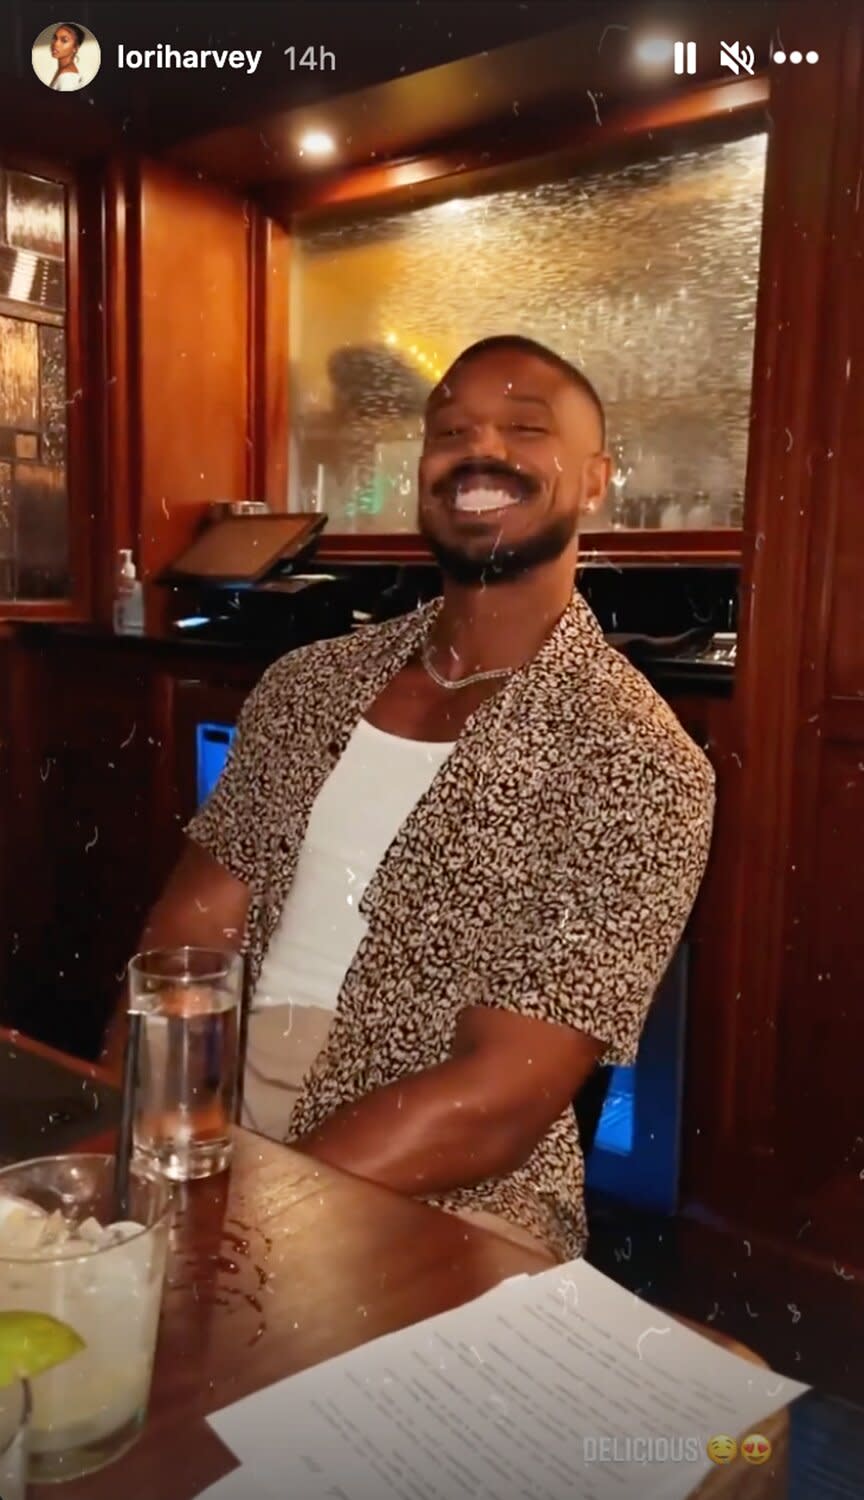 Michael B. Jordan Flashes a Smile During Date Night with Lori Harvey: 'Delicious'